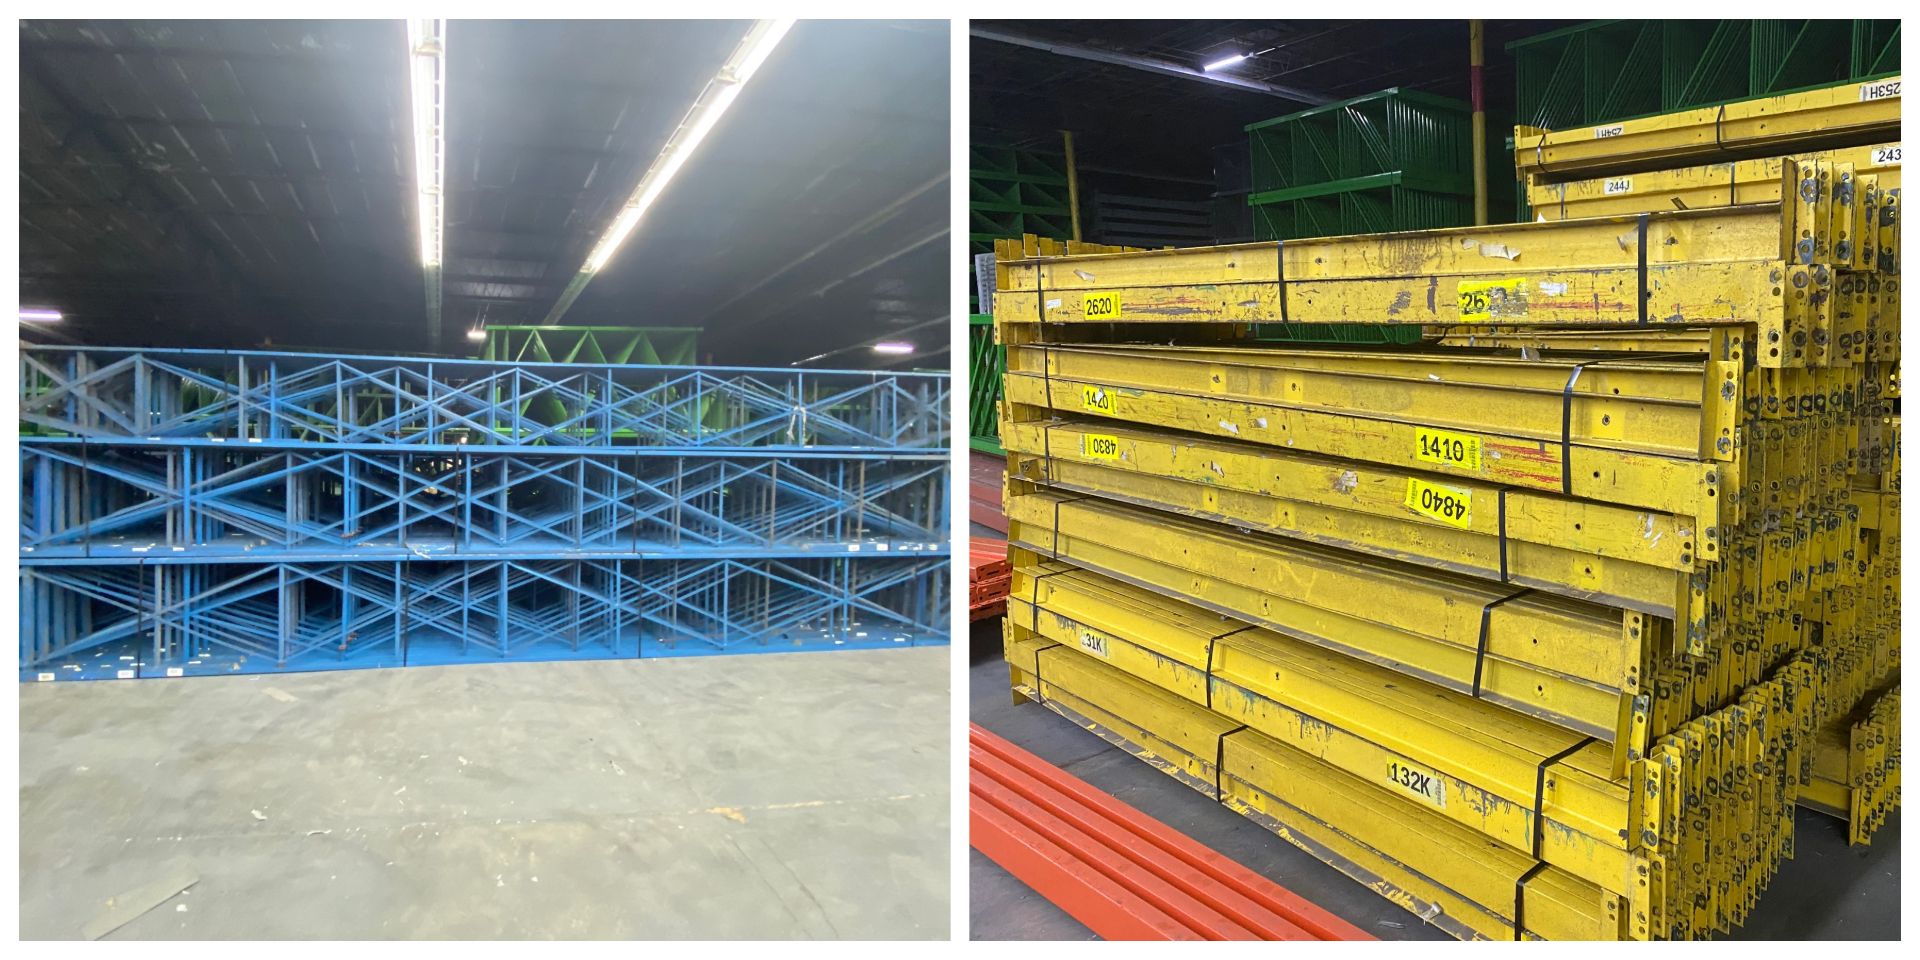 9 BAYS OF STRUCTURAL STYLE PALLET RACKS - 9 BAYS X 1 LINES X 30'H X 36"D X 112"W